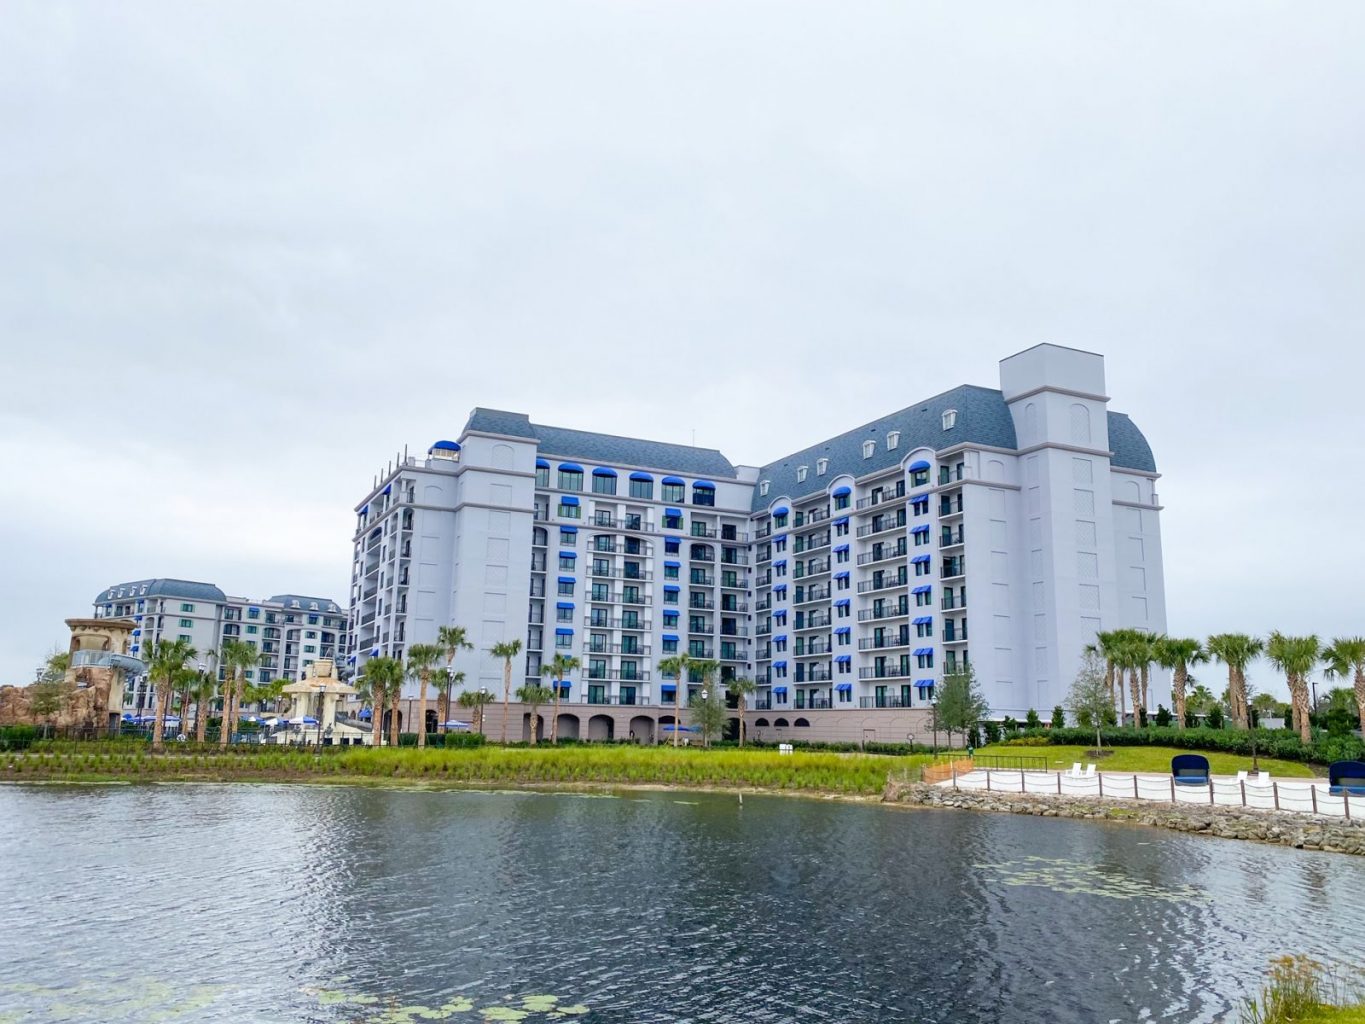 outside view from across the water of Disney's Riviera Resort